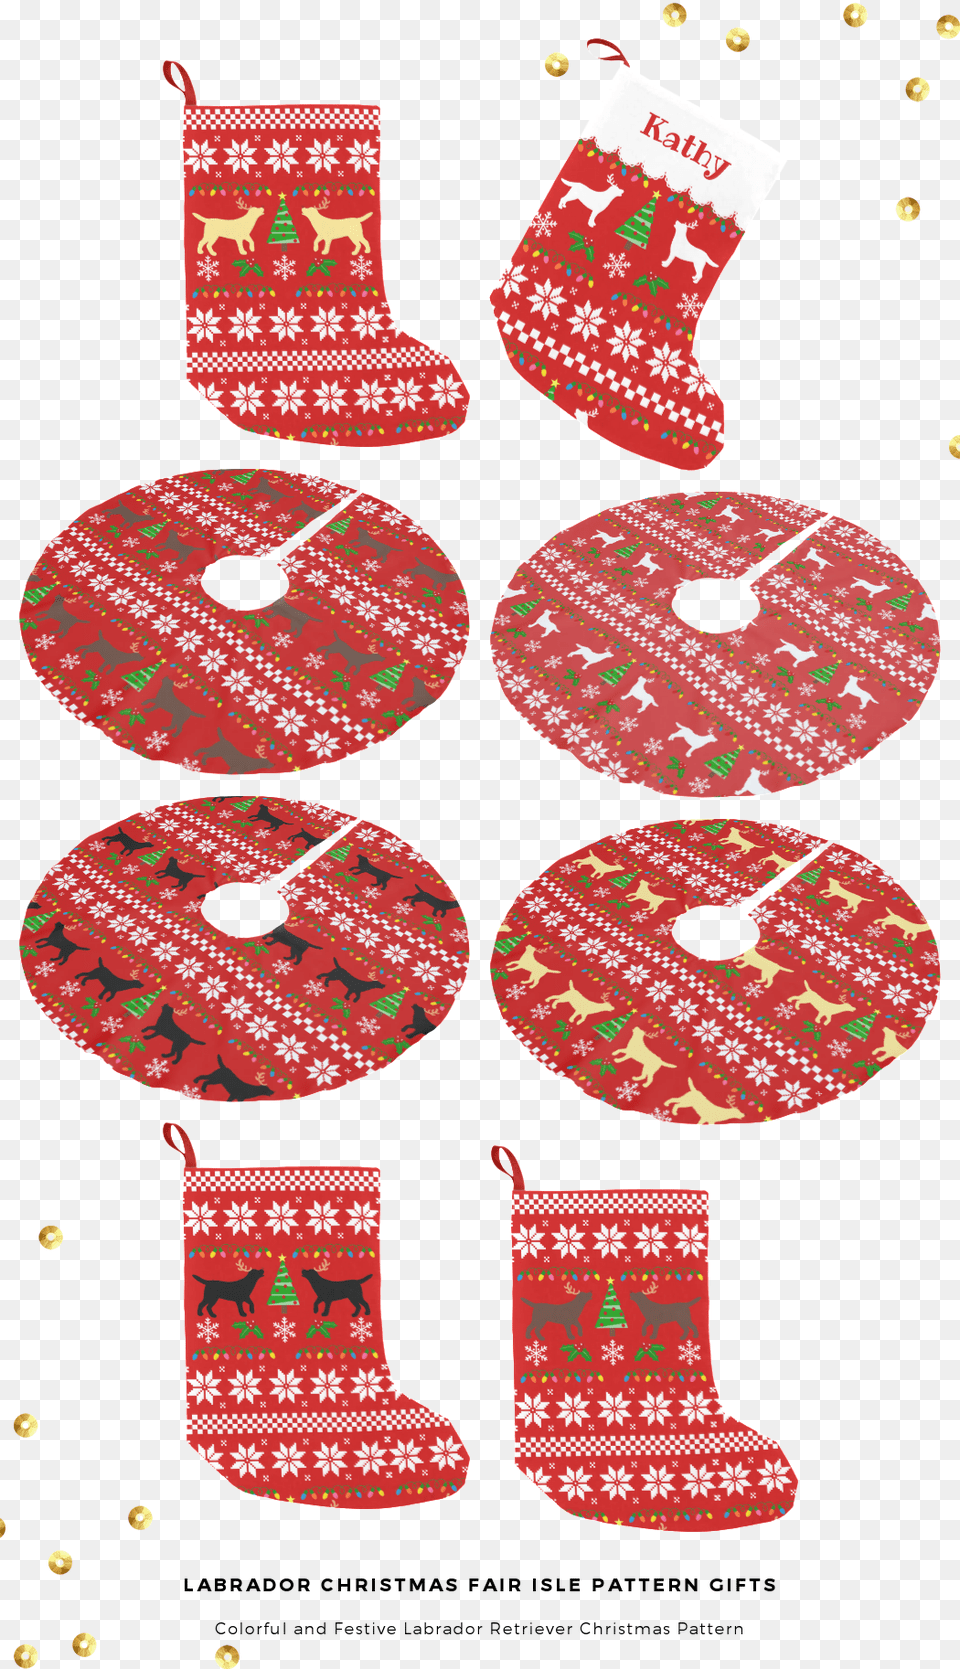 Labrador Christmas Fair Isle Pattern Gifts And Home Labrador Retriever, Clothing, Hosiery, Christmas Decorations, Festival Free Png Download